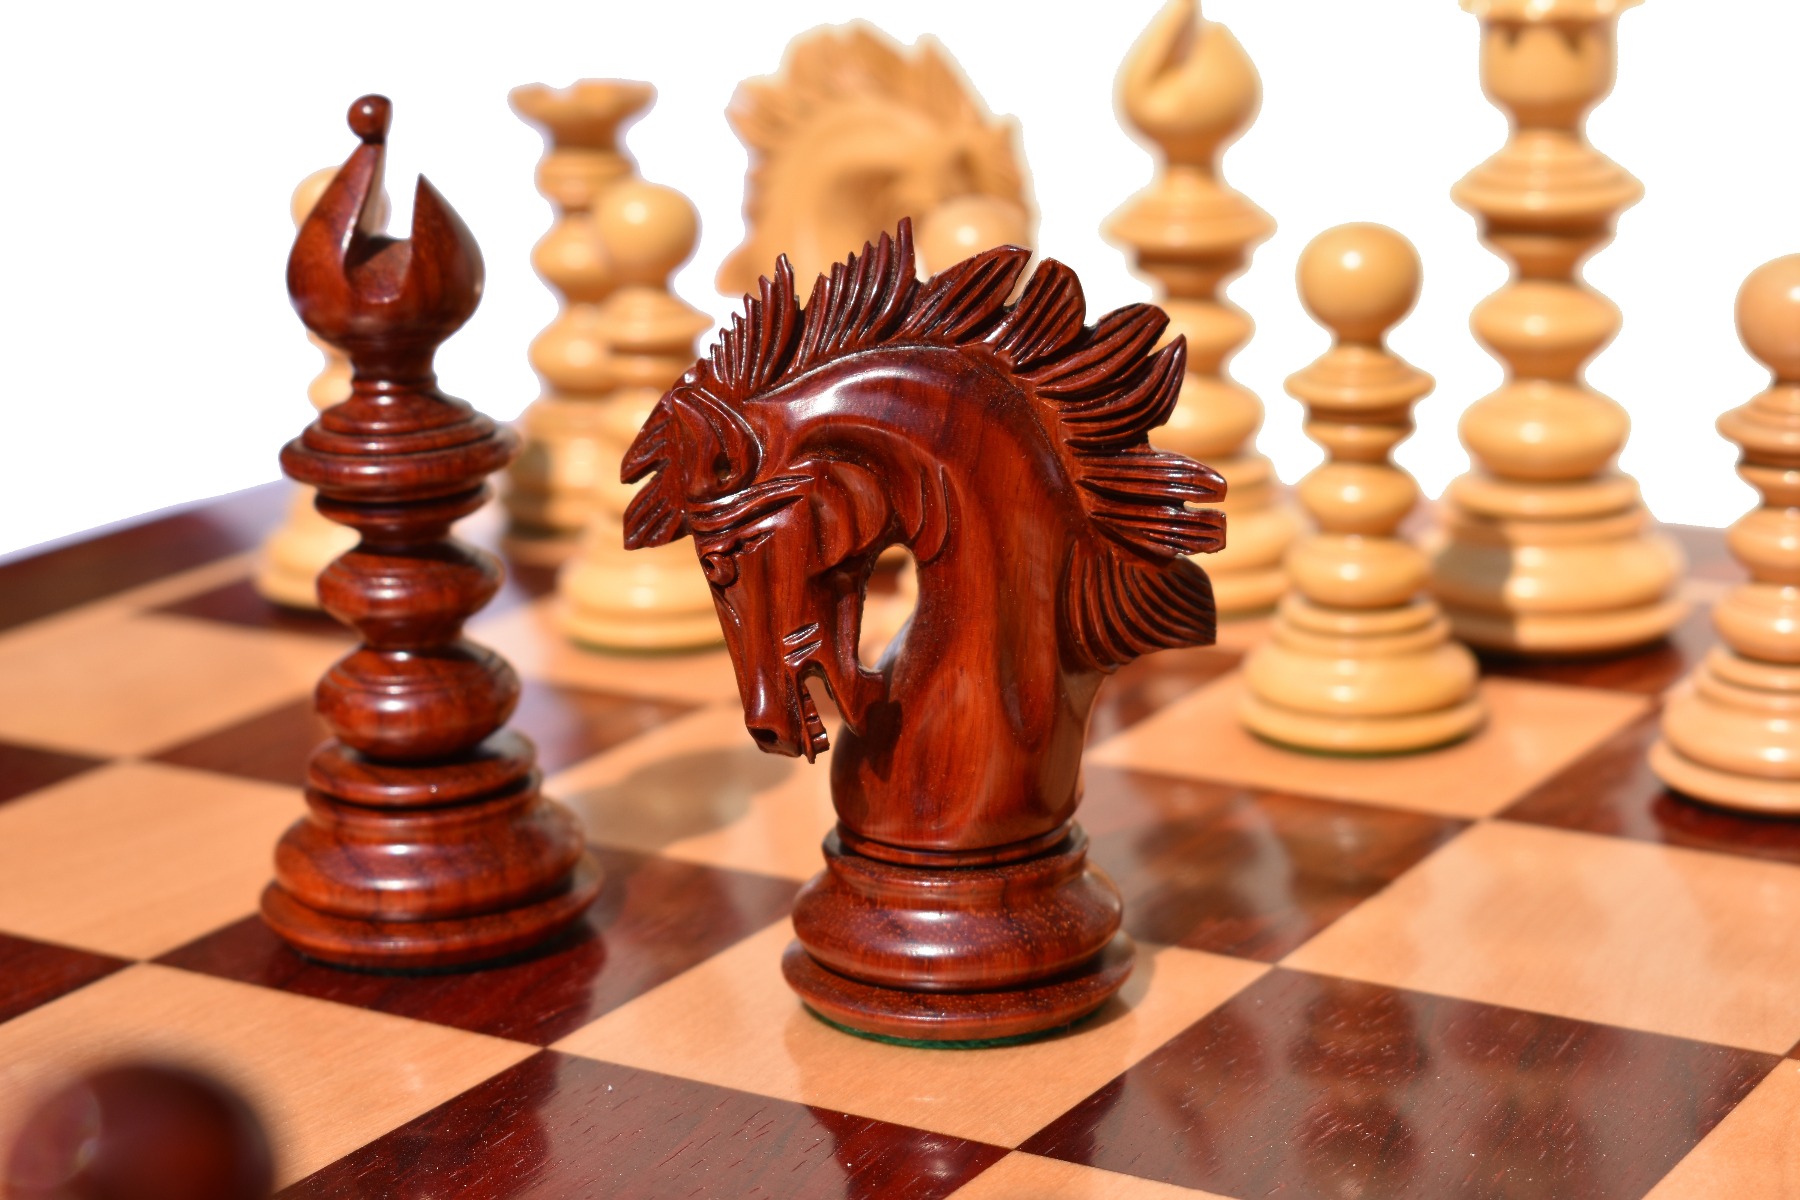 CHESSBOARD LUXURY FORTY-FIVE° – Luxury of Homes